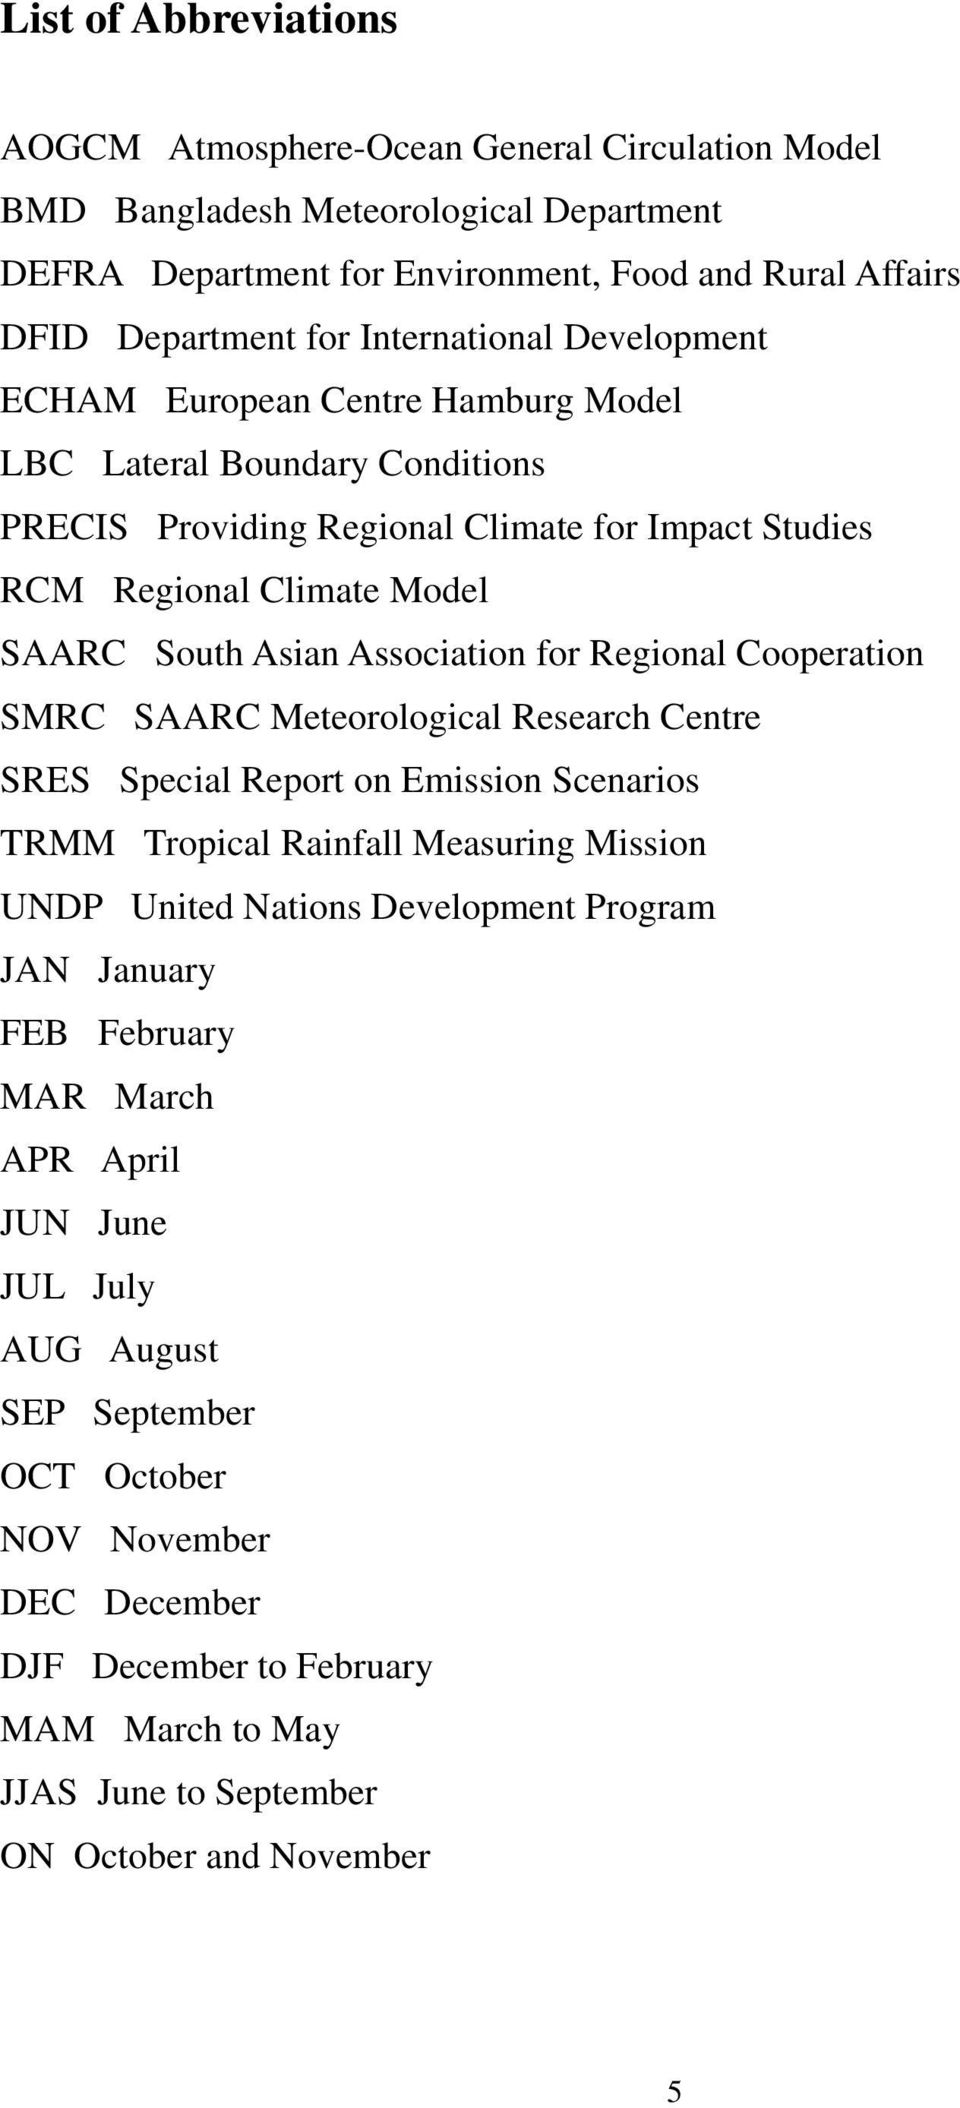 Association for Regional Cooperation SMRC SAARC Meteorological Research Centre SRES Special Report on Emission Scenarios TRMM Tropical Rainfall Measuring Mission UNDP United Nations Development